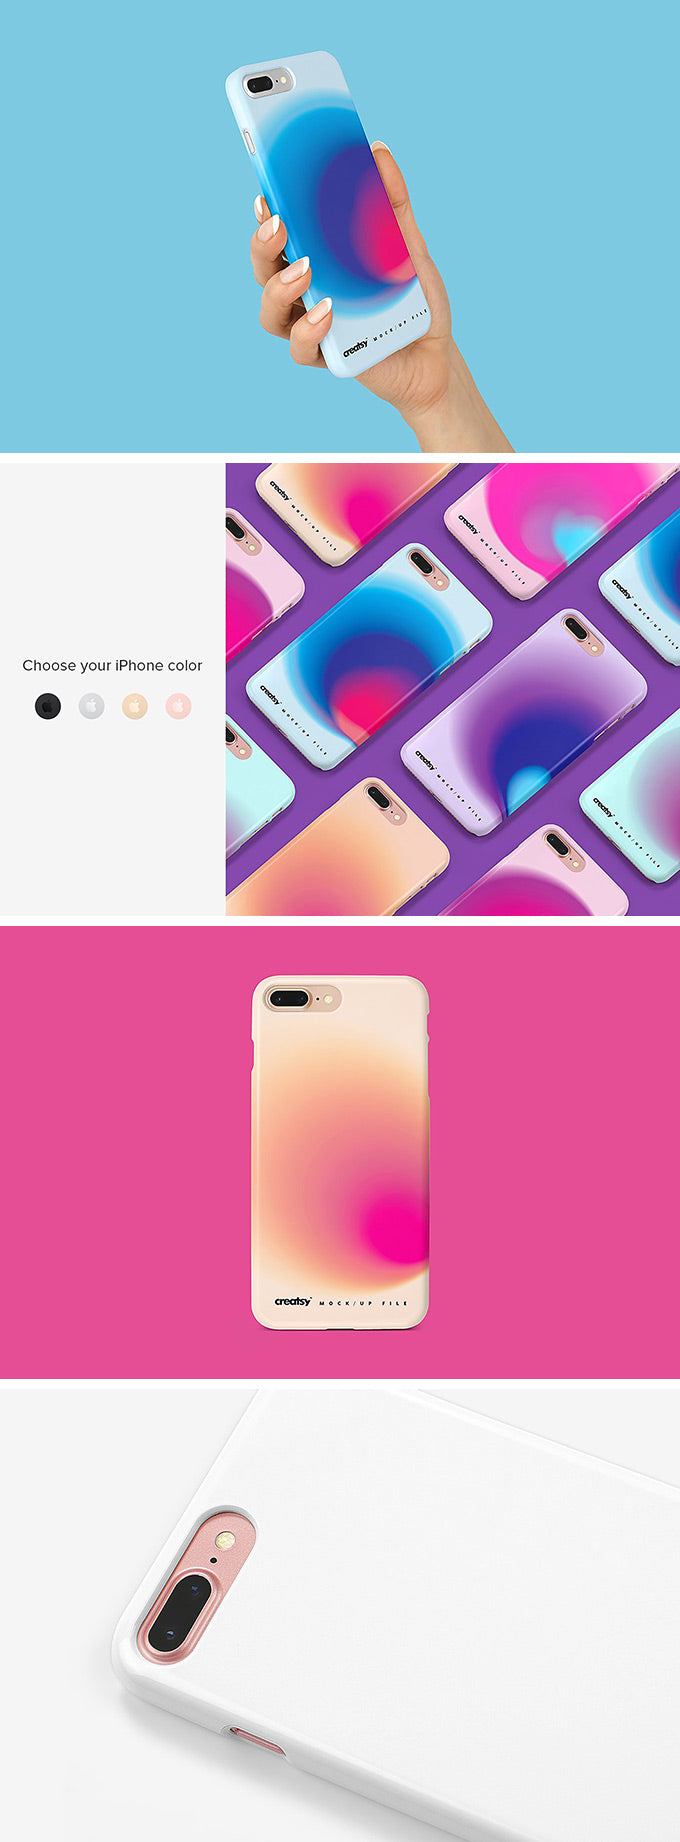 Download Iphone 8 With A Plastic Case Mockup Mockup Hunt